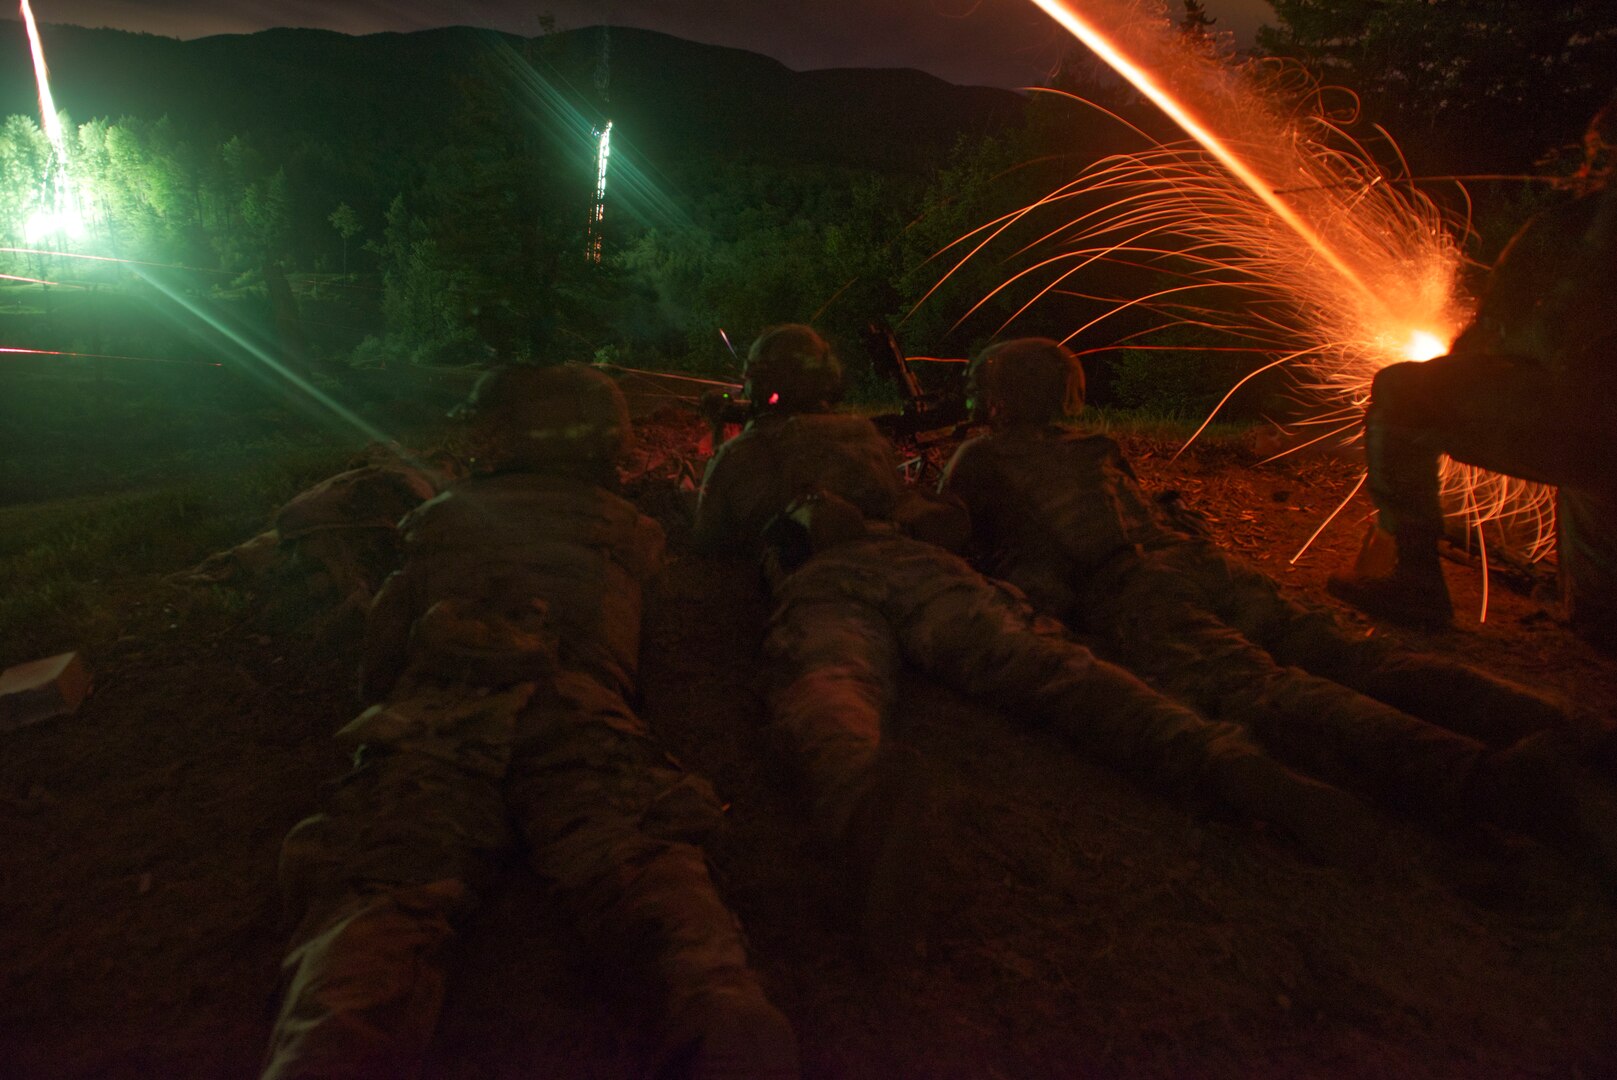 U.S. Army Soldiers with Bravo Company, 3rd Battalion, 172nd Infantry Regiment, 86th Infantry Brigade Combat Team (Mountain), Maine Army National Guard, establish a support by fire position during a nighttime live-fire training lane, Ethan Allen Firing Range, Jericho, Vermont, July 20, 2020. The live-fire range was conducted as part of their annual training and included multiple assault elements, support by fire positions and door breaches. (U.S. Army National Guard Photo by 2nd Lt. Nathan Rivard)